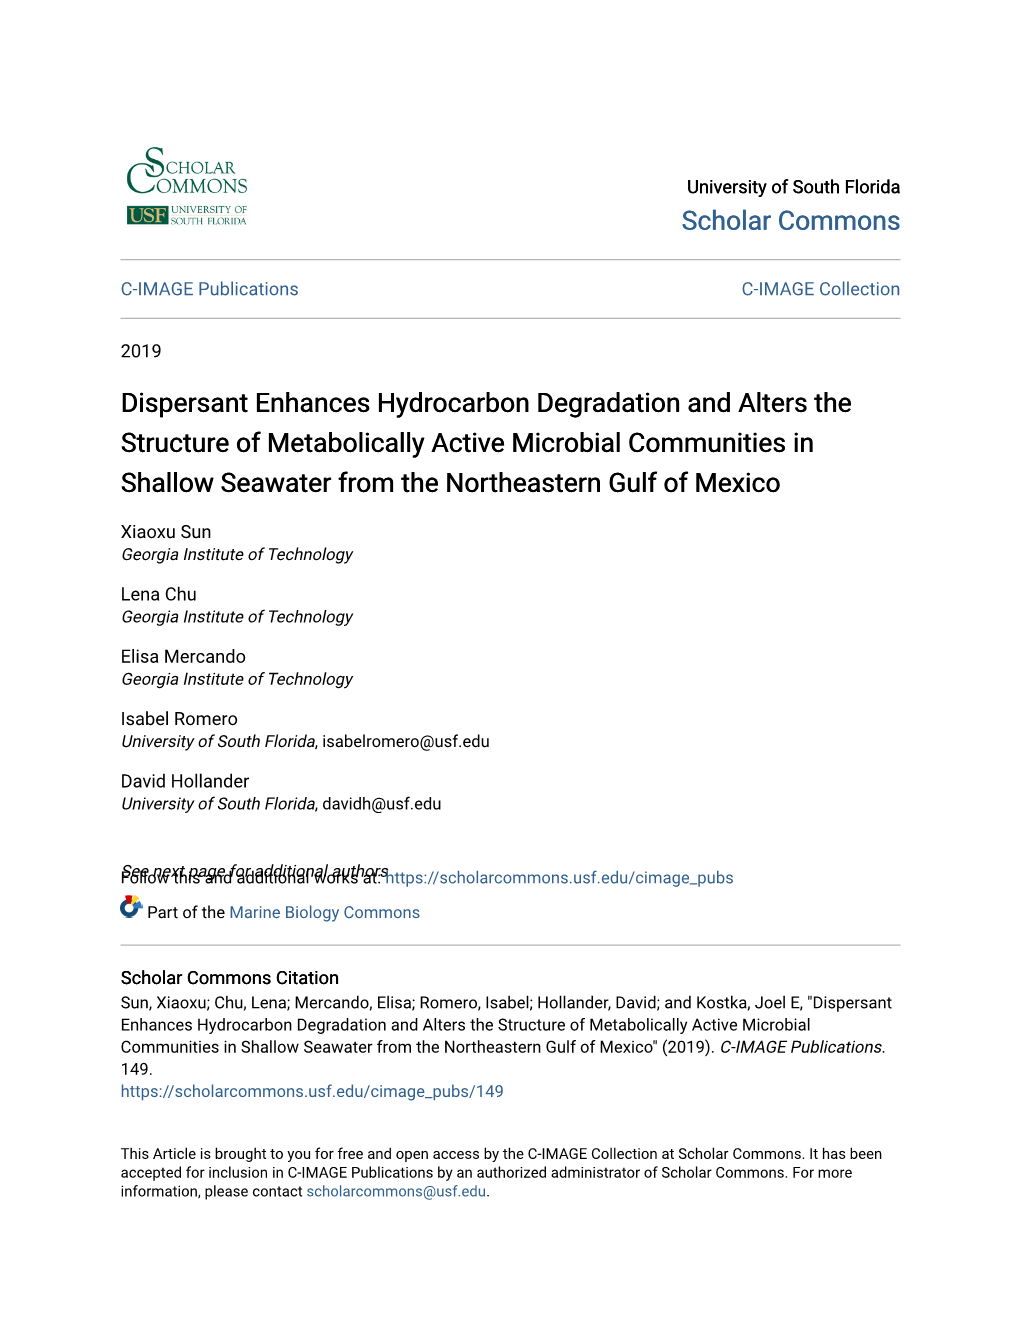 Dispersant Enhances Hydrocarbon Degradation and Alters The